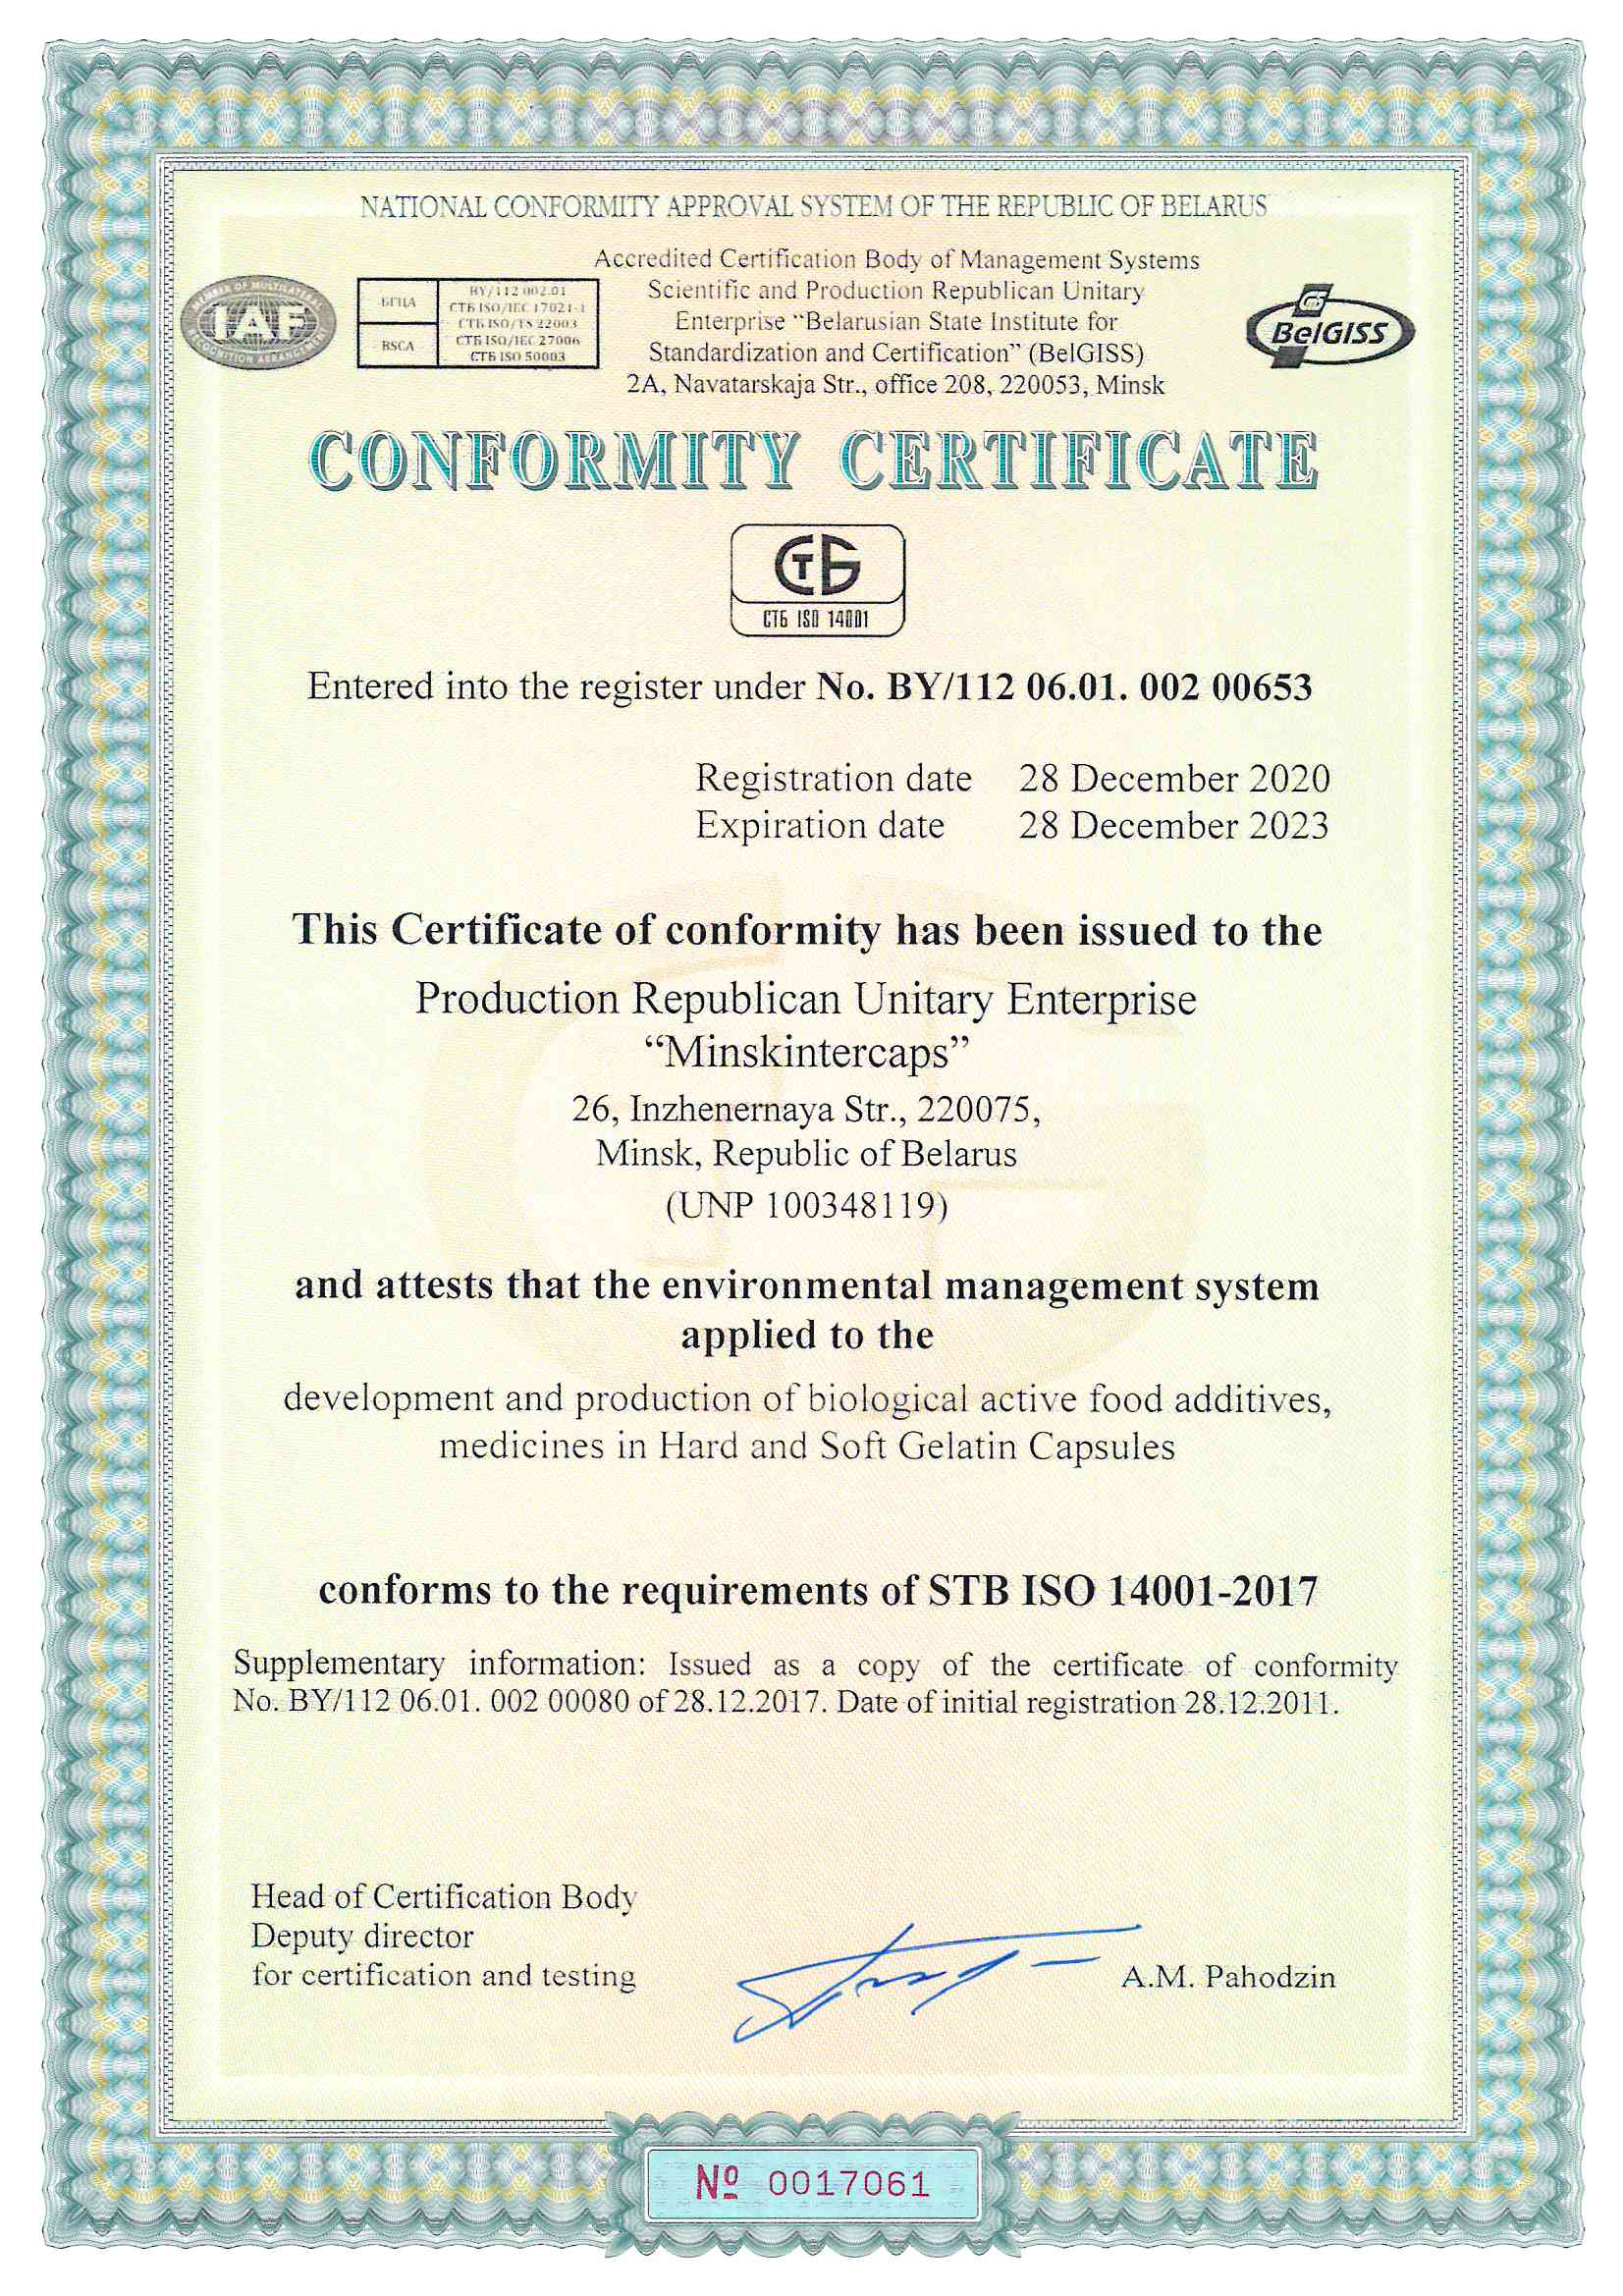 Conformity certificate requirements of STB ISO 14001-2017